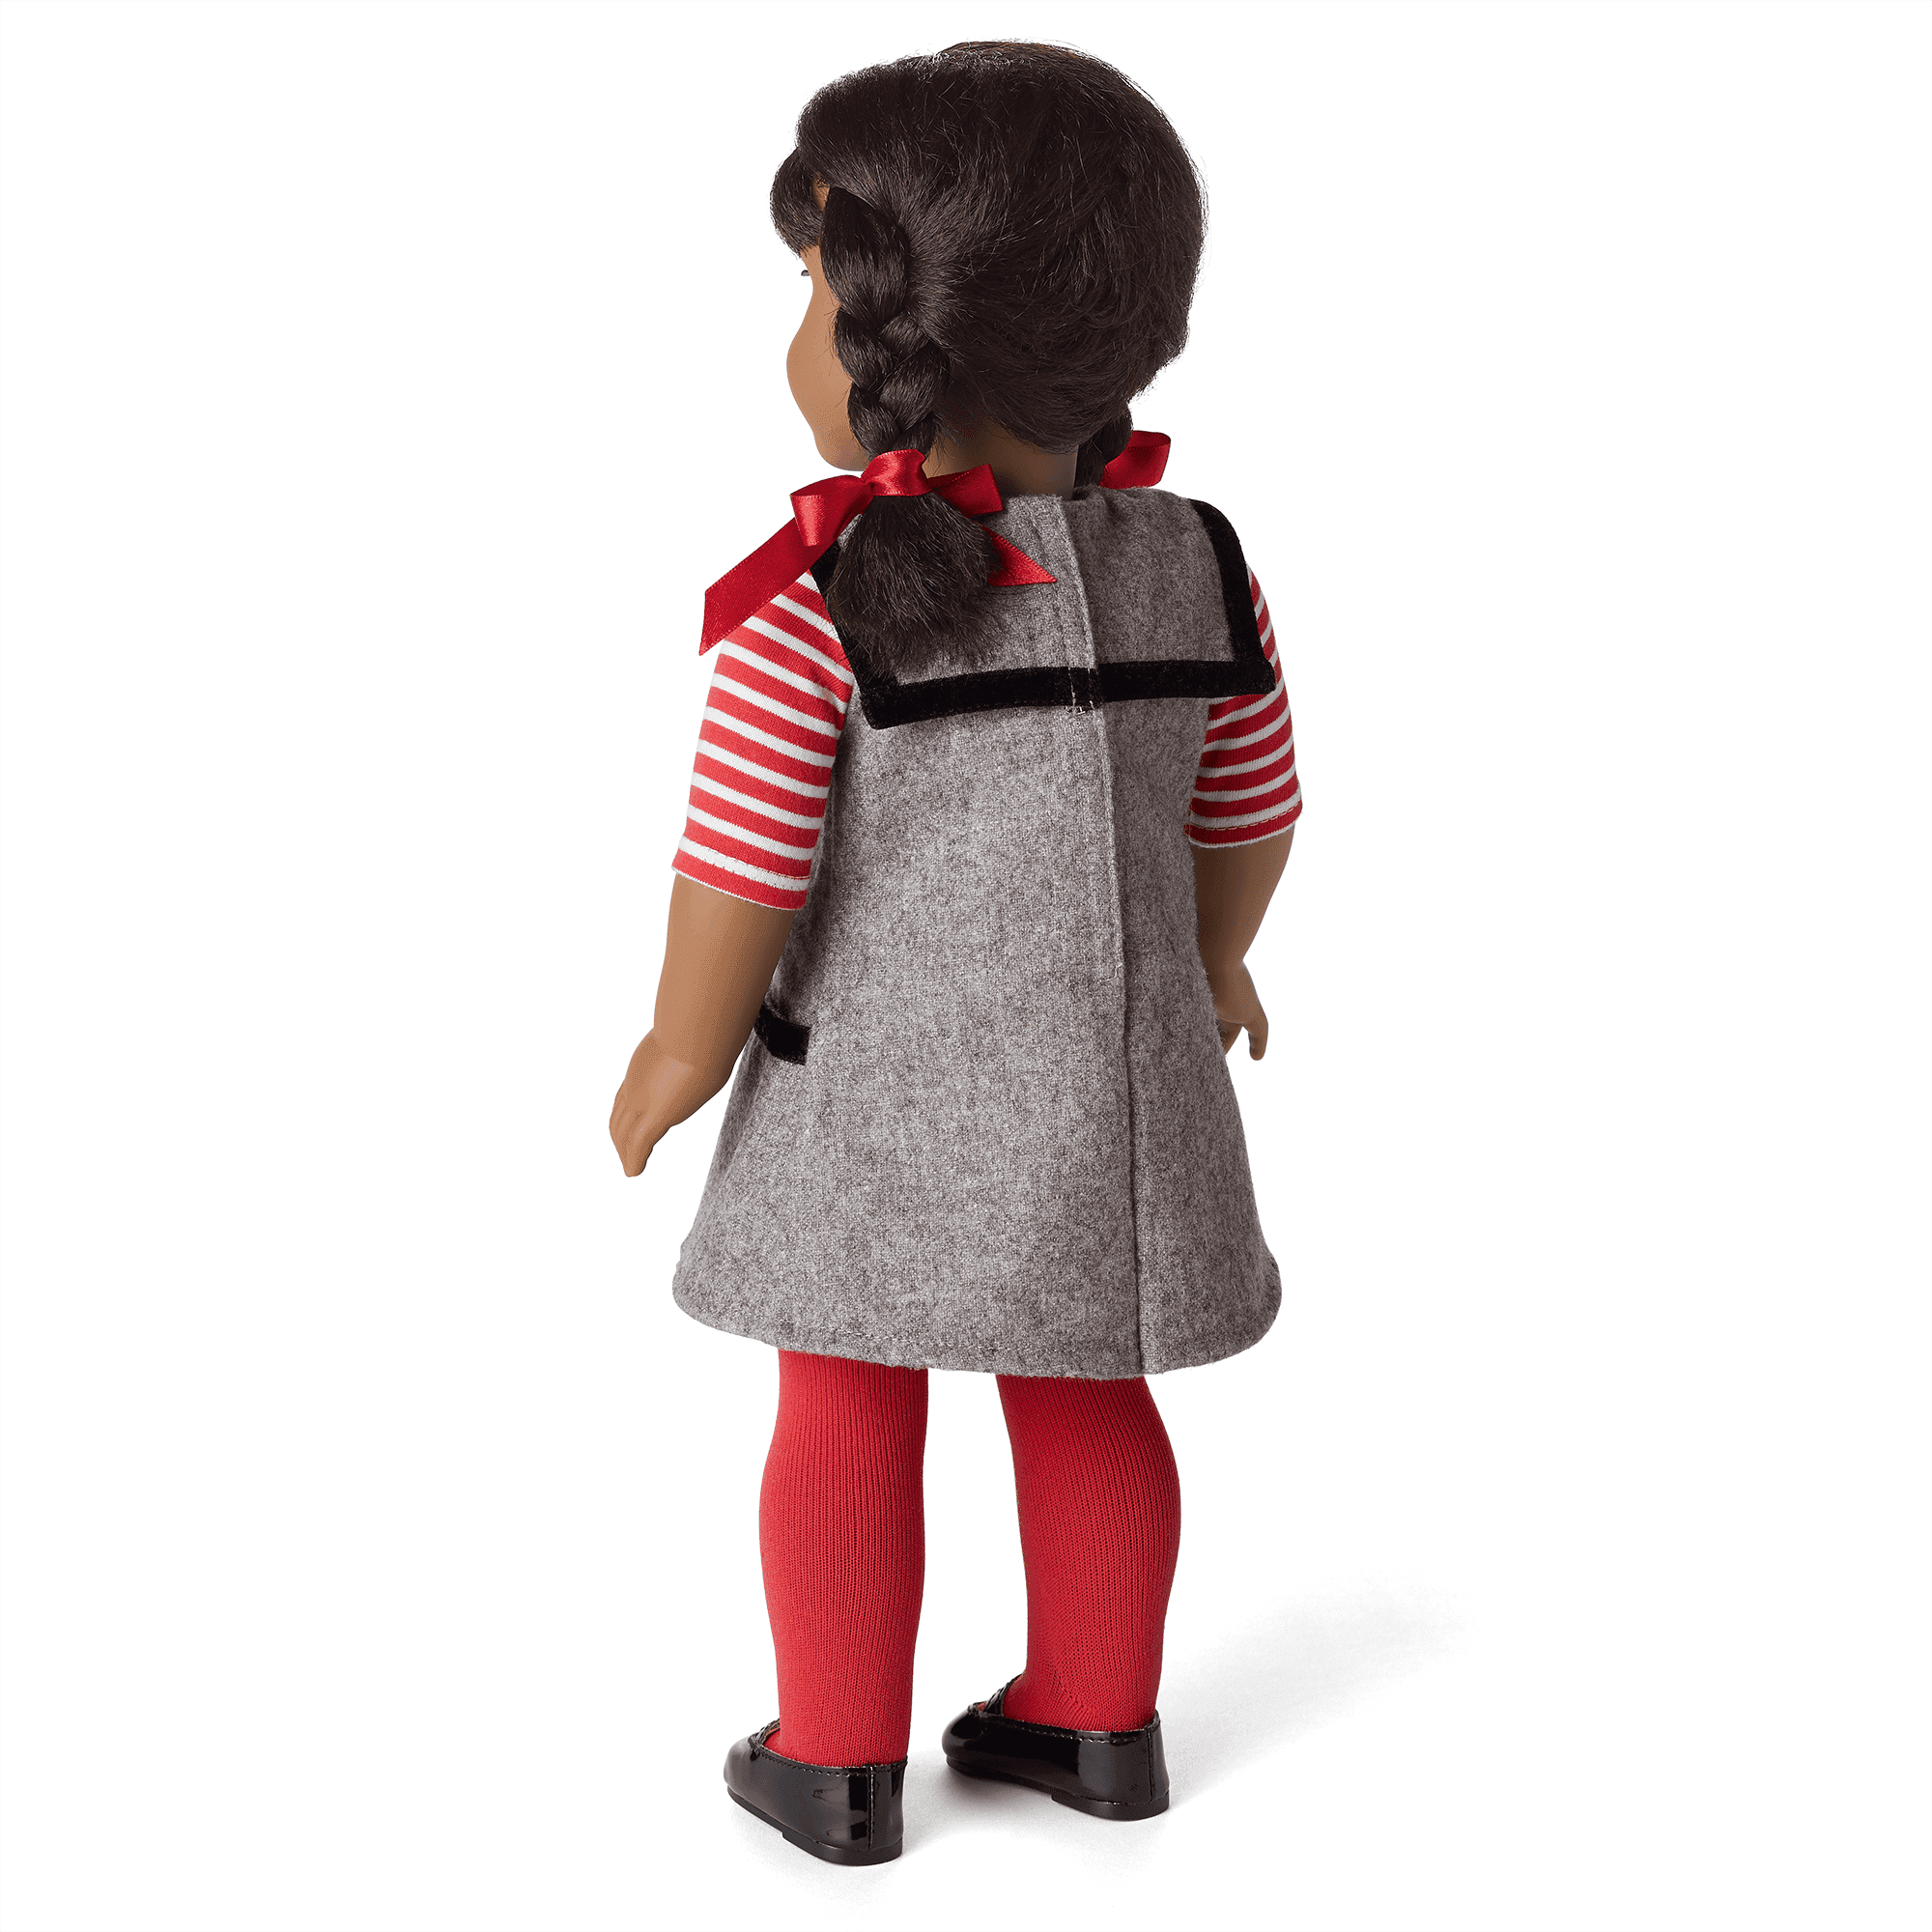 Melody’s™ School Outfit for 18-inch Dolls